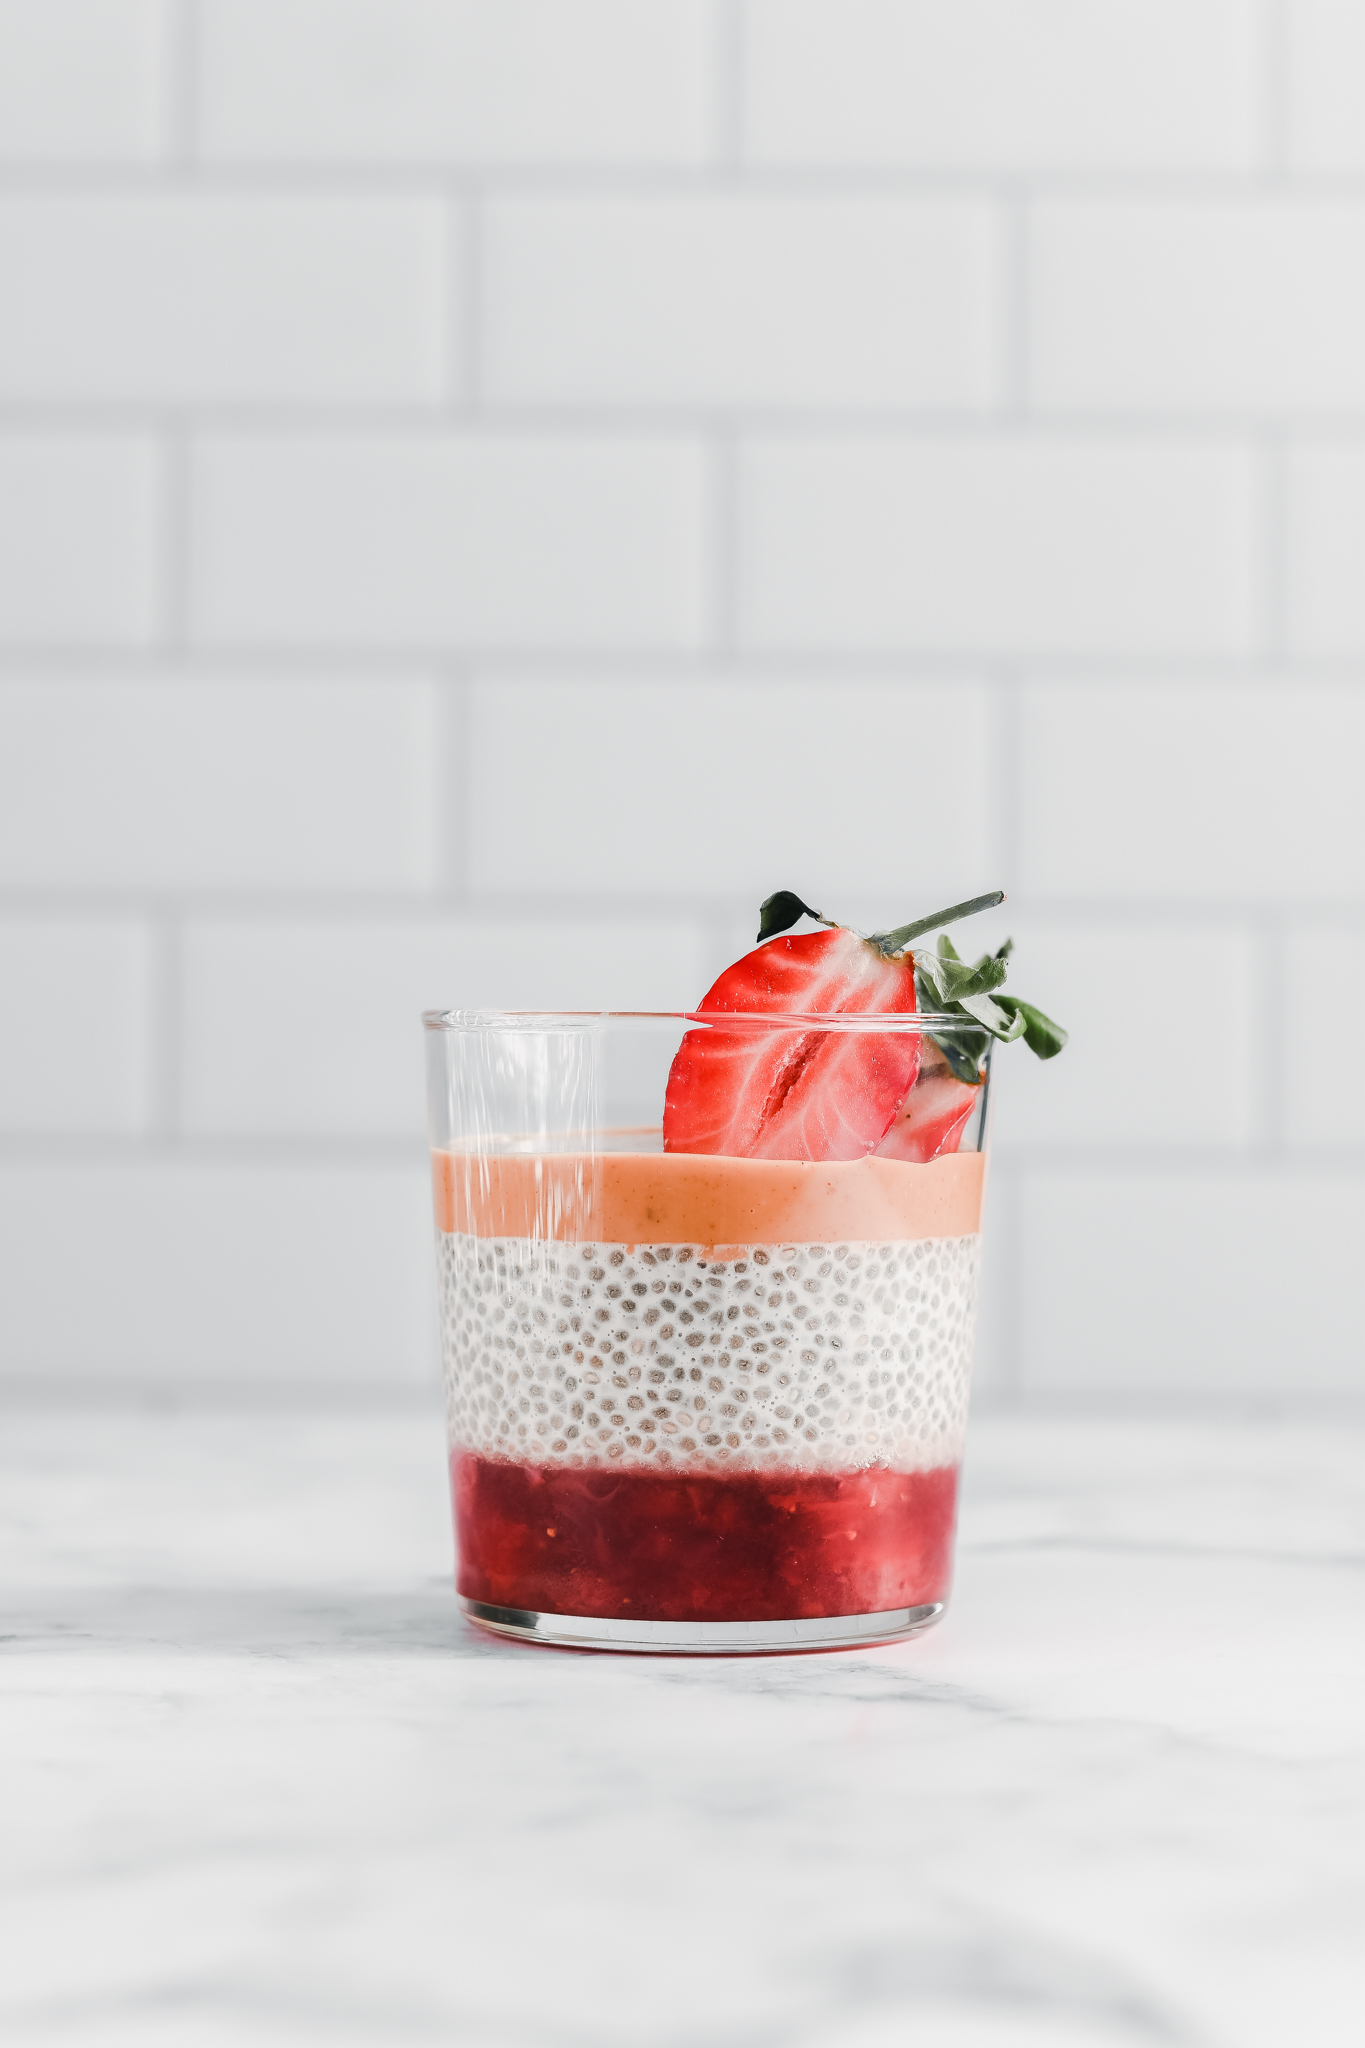 Three Layered Peanut Butter and Jelly Chia